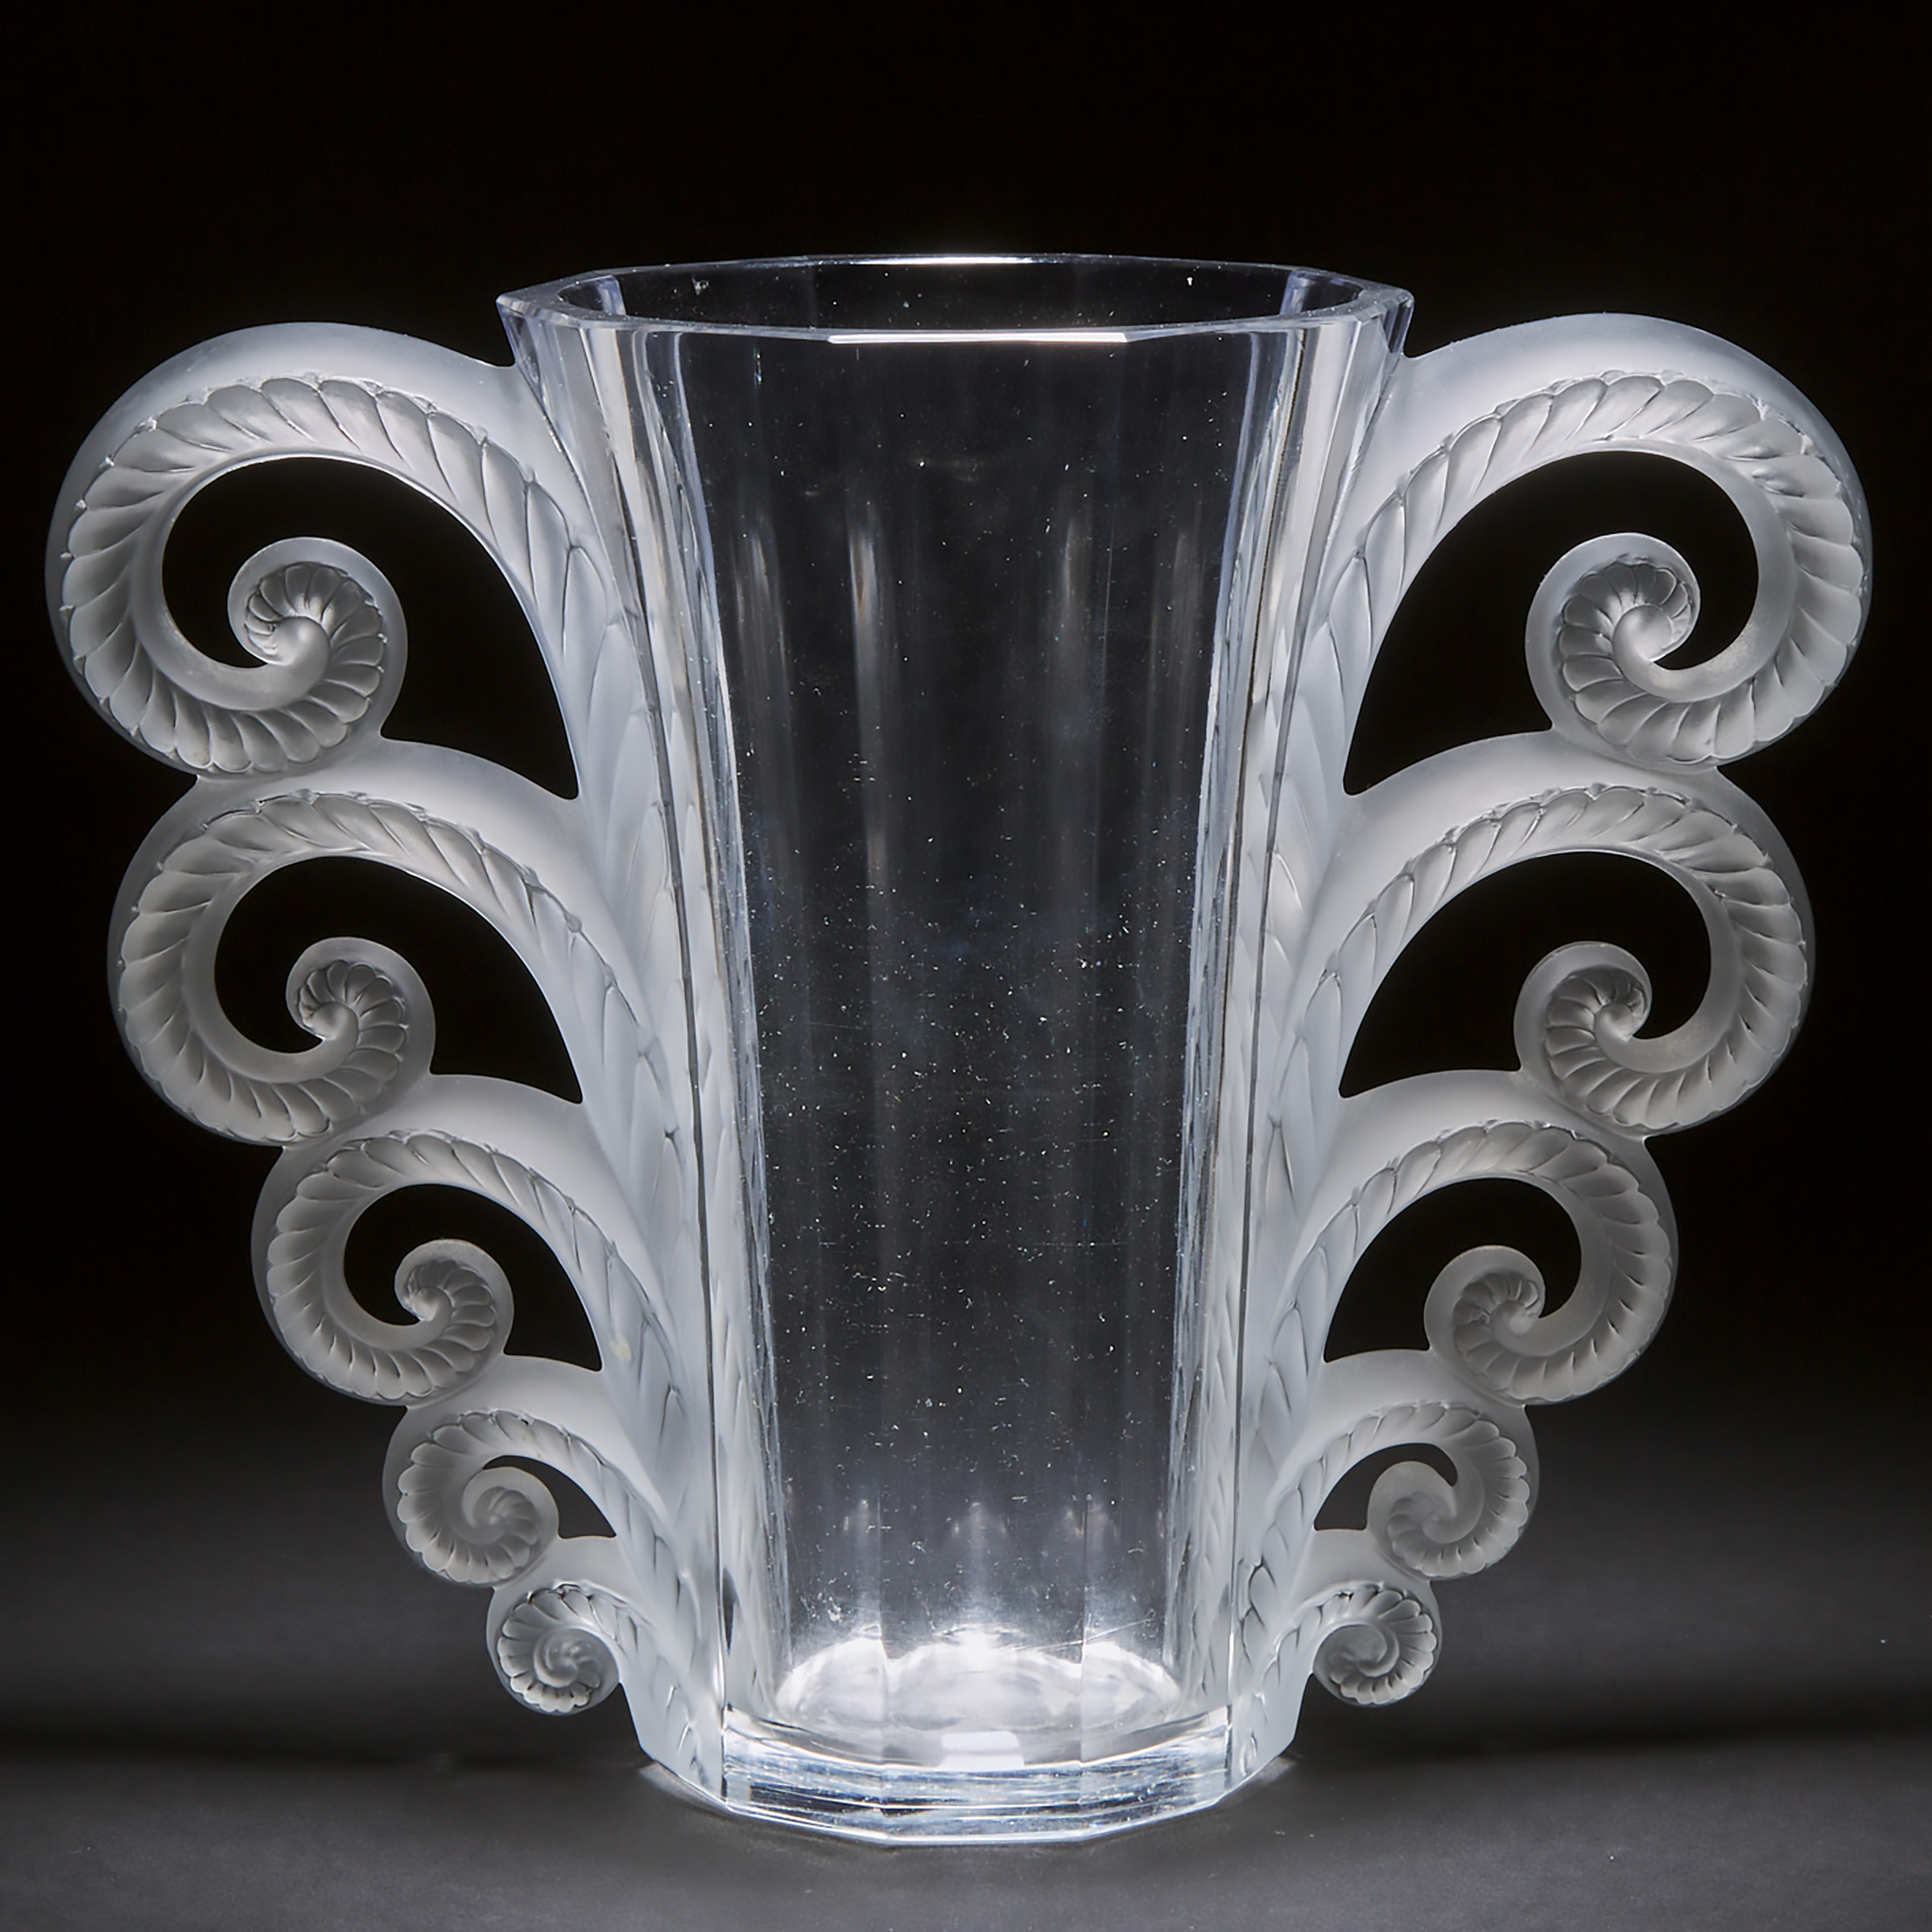 'Beauvais', Lalique Moulded and Partly Frosted Glass Vase, post-1945